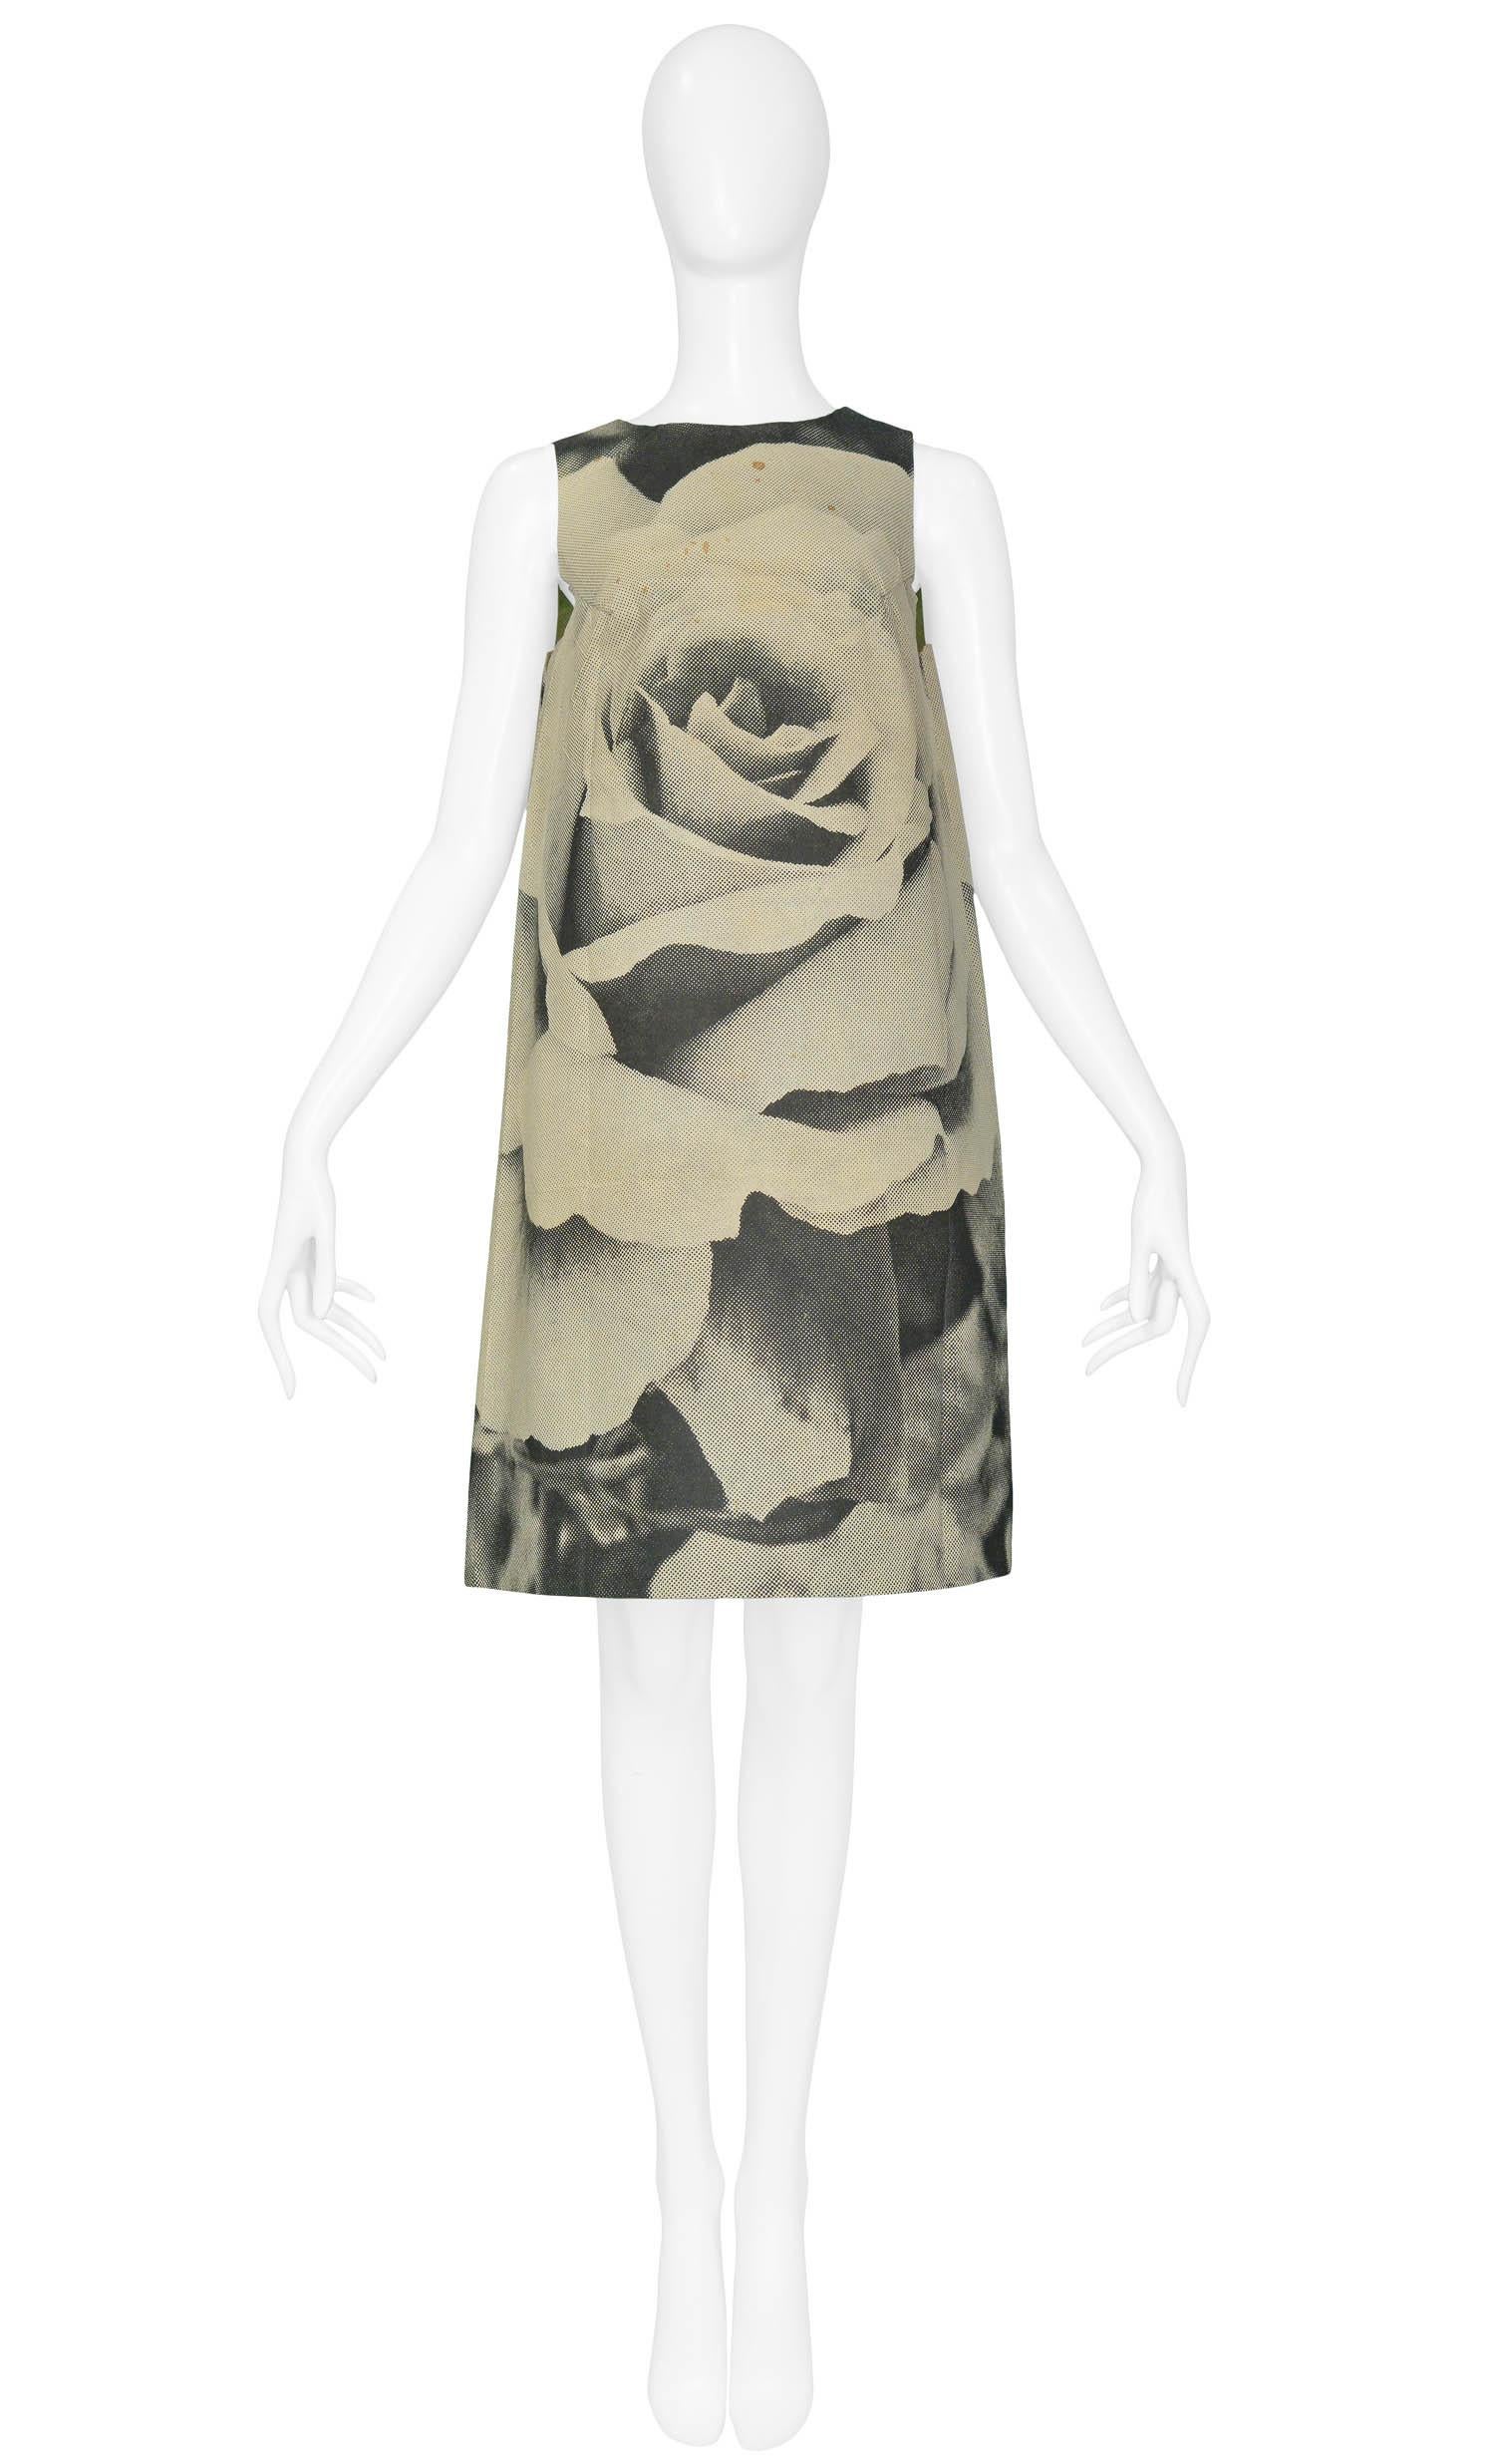 Rare & highly collectable London Series Poster 'Rose' Dress. This dress, designed by Harry Gordon, features an image of a rose on a paper dress comprised of screen-printed tisse, wool pup and rayon mesh. Circa 1968.

Excellent Original